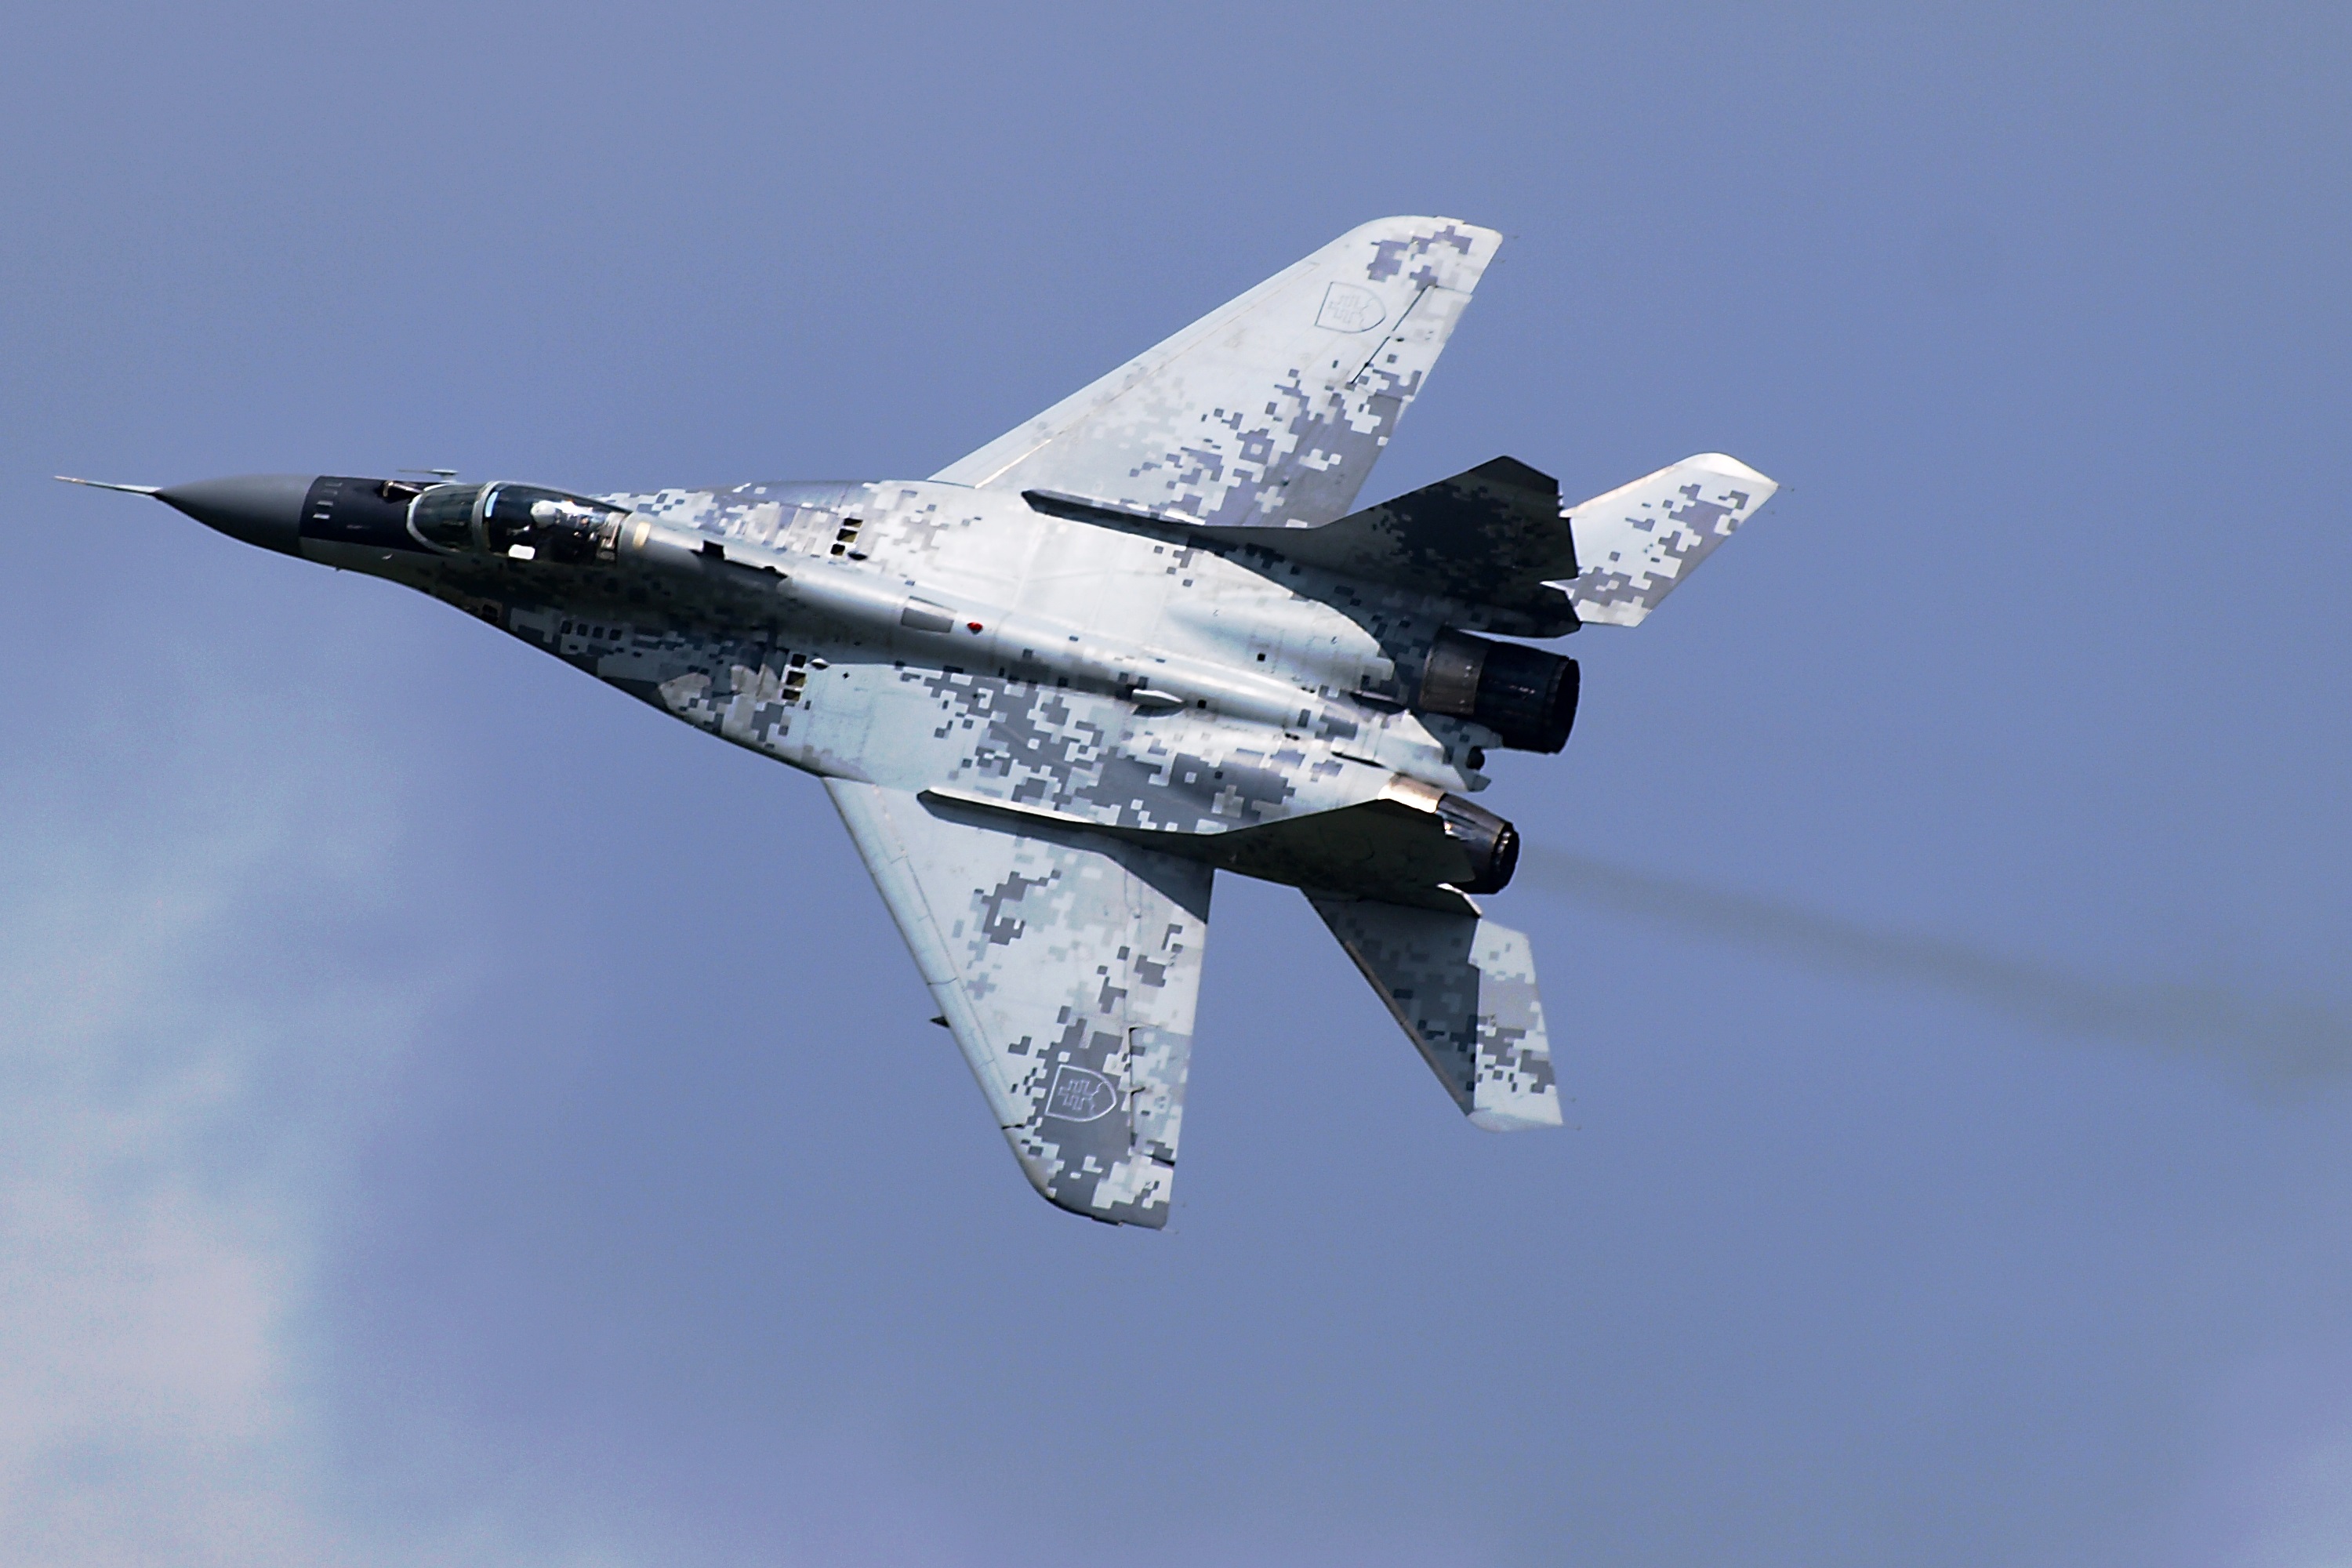 Slovakia Says It Is Ready To Supply Its MiG-29 Fighter Jets To Ukraine